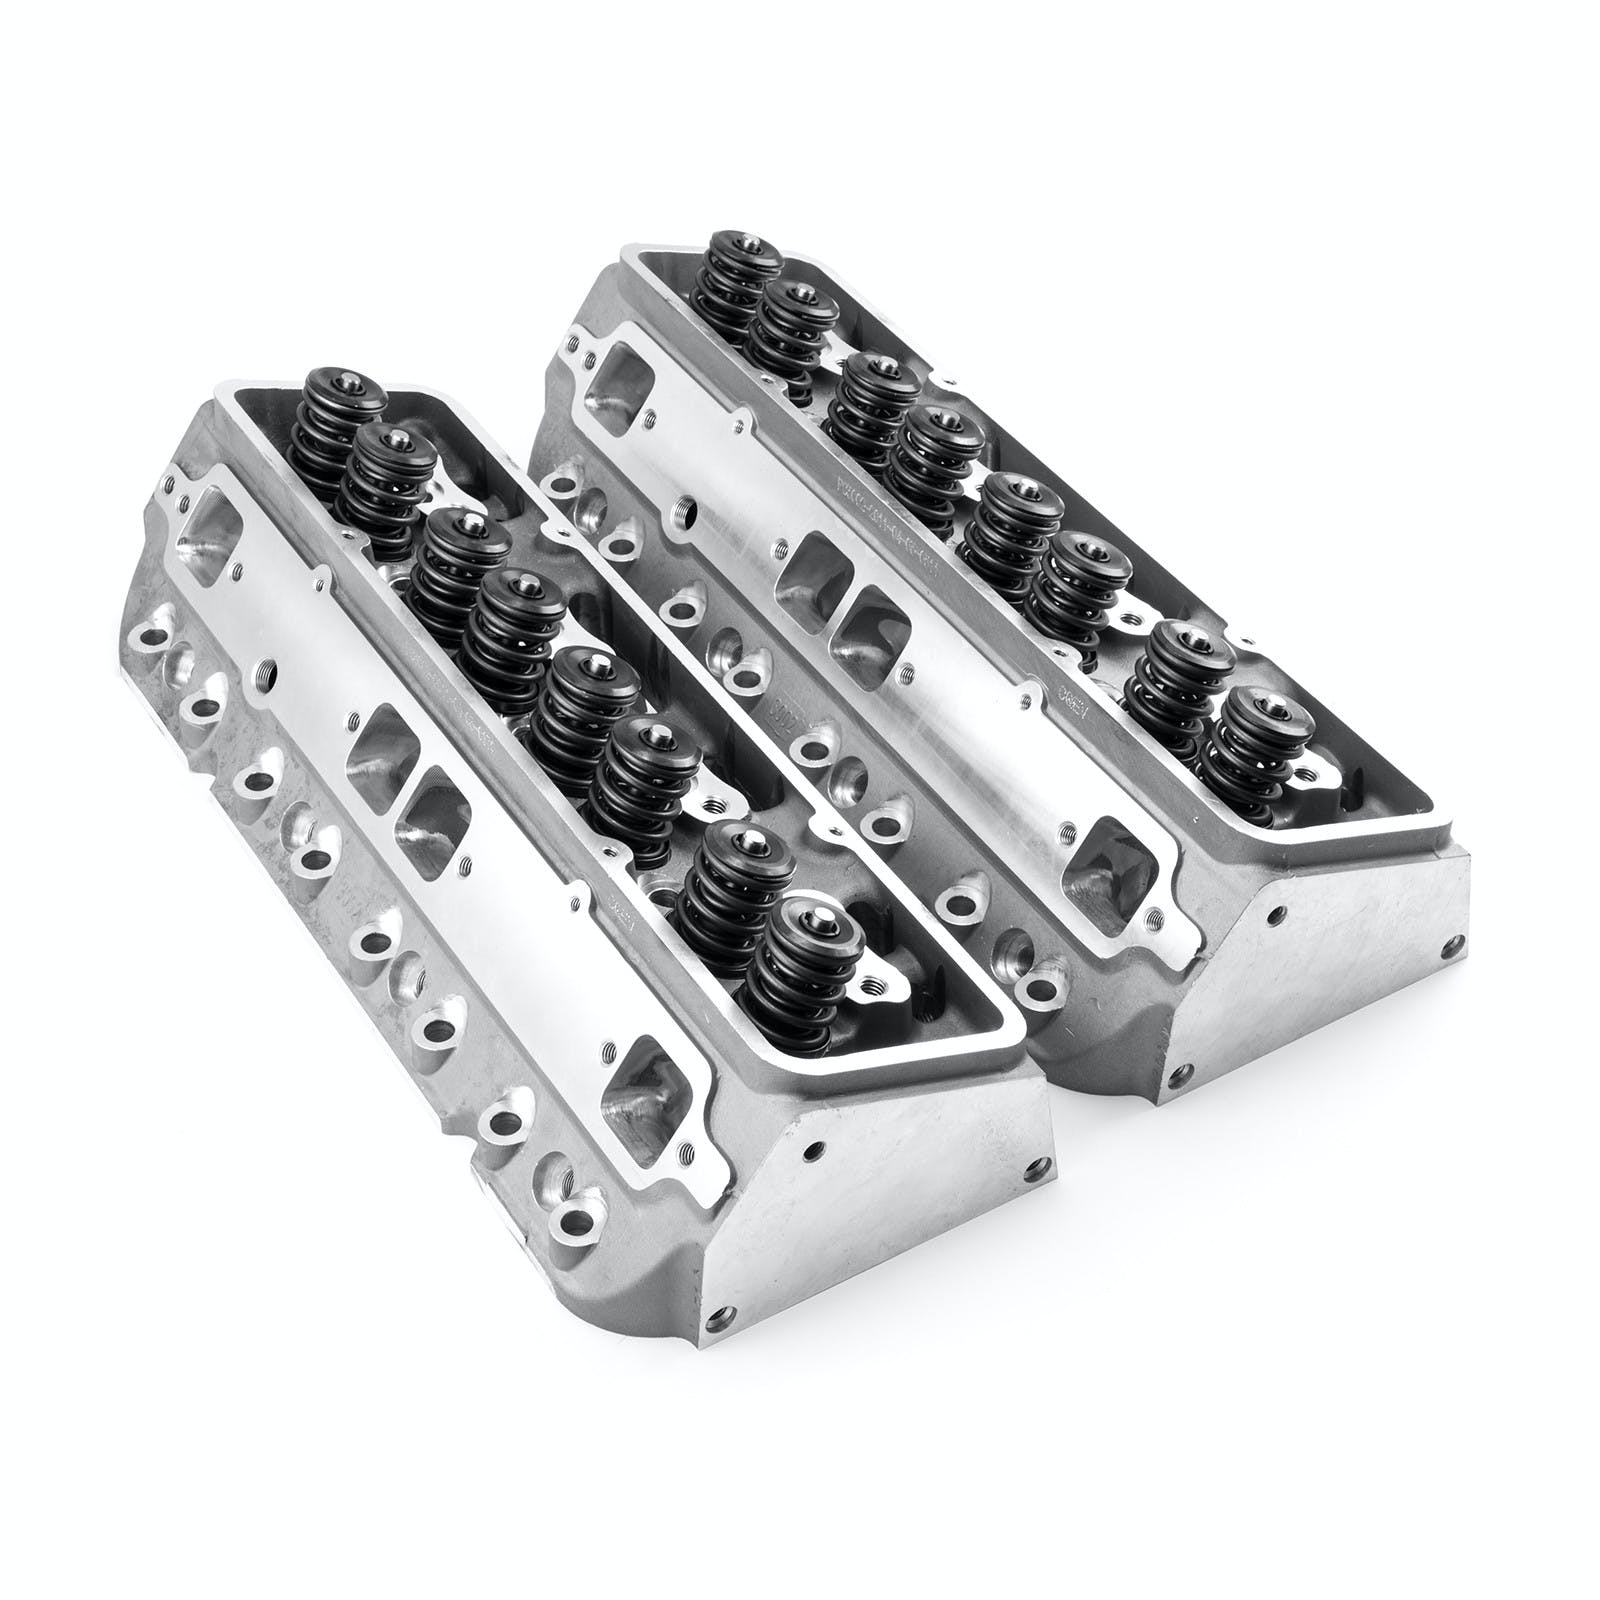 Speedmaster PCE281.2015 217cc 68cc Angle CNC Solid-R Complete Aluminum Cylinder Heads